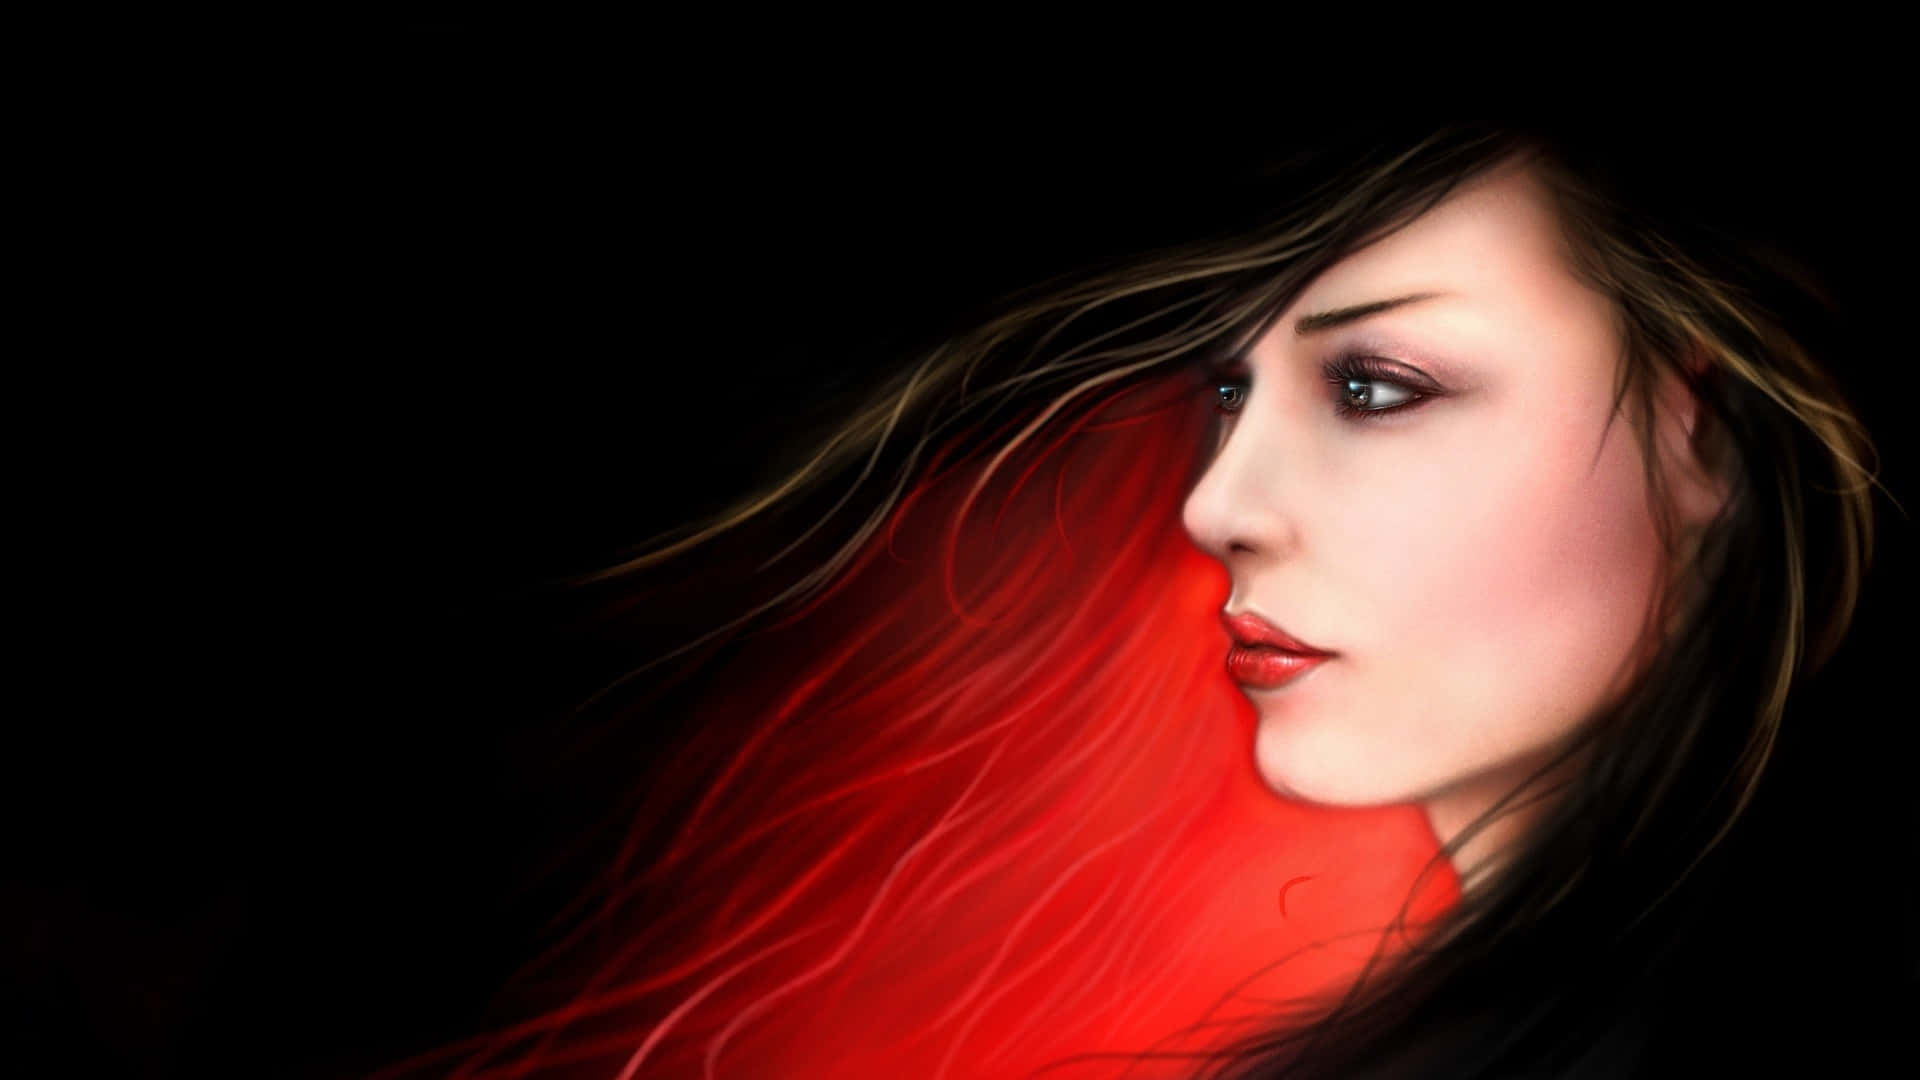 Mysterious Red Haired Woman Wallpaper